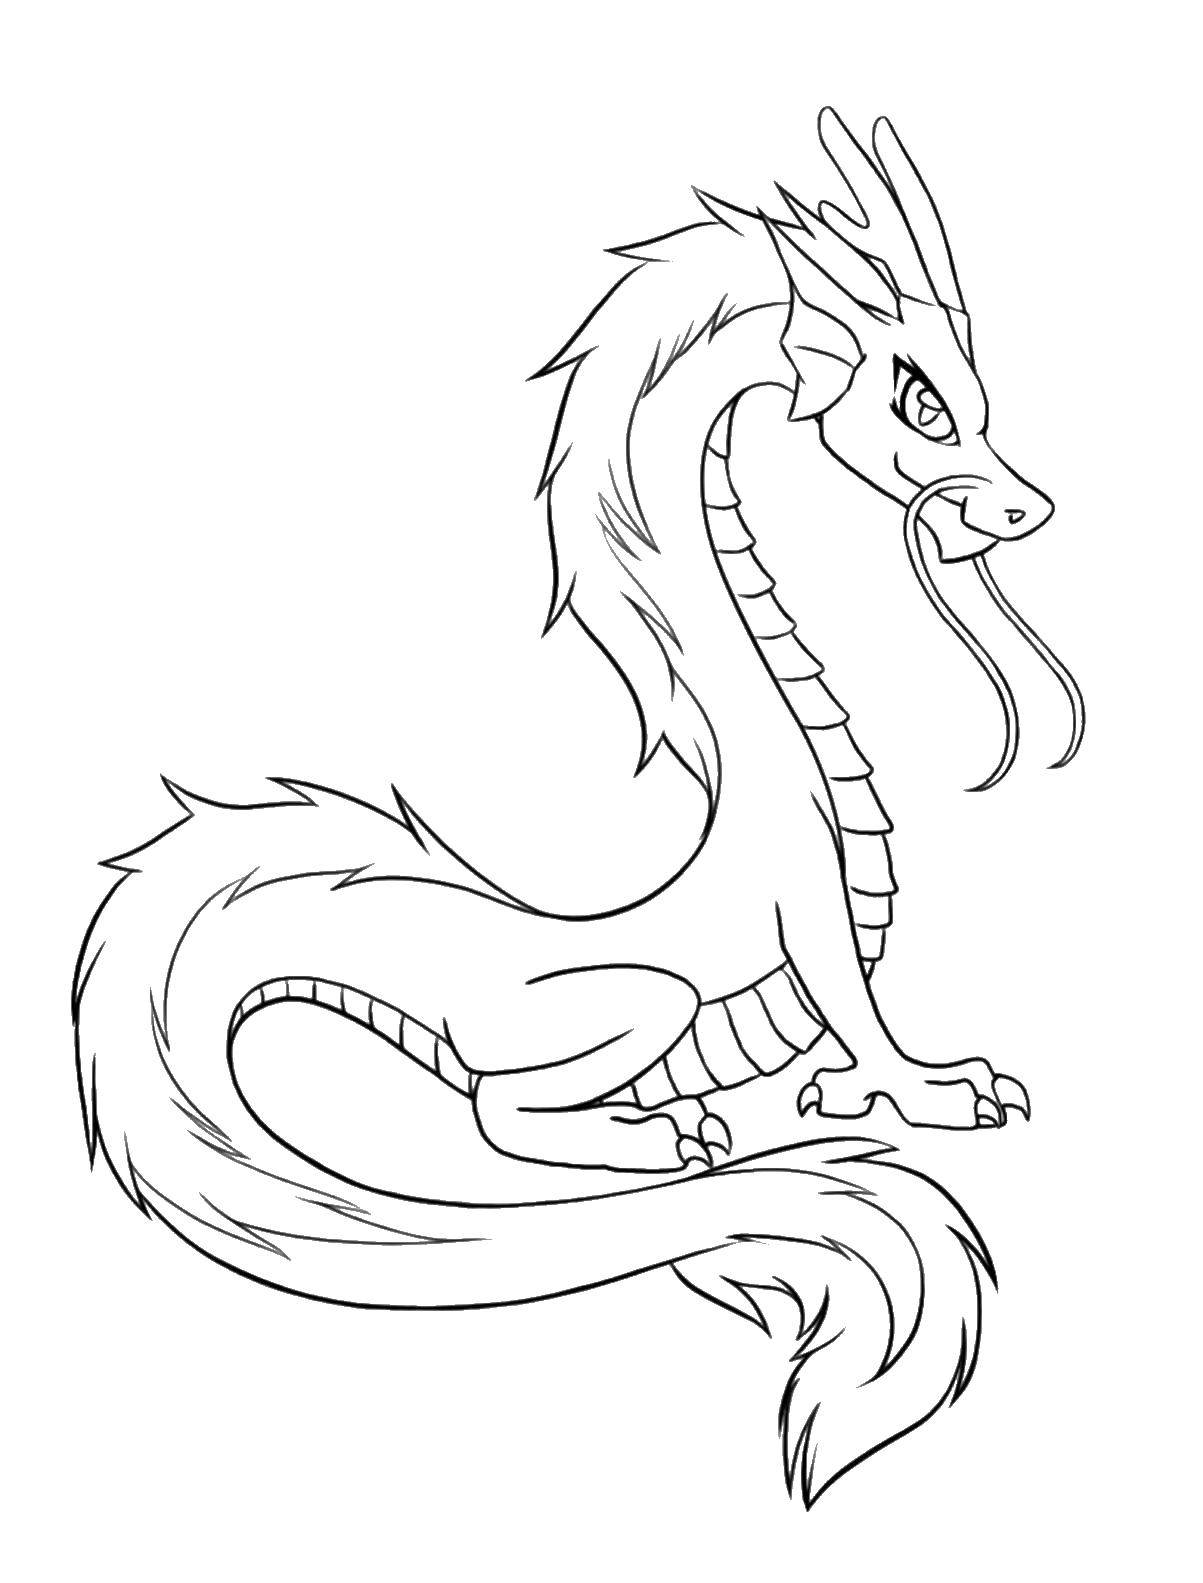 Coloring Dragon serpent. Category Dragons. Tags:  dragons, snakes.